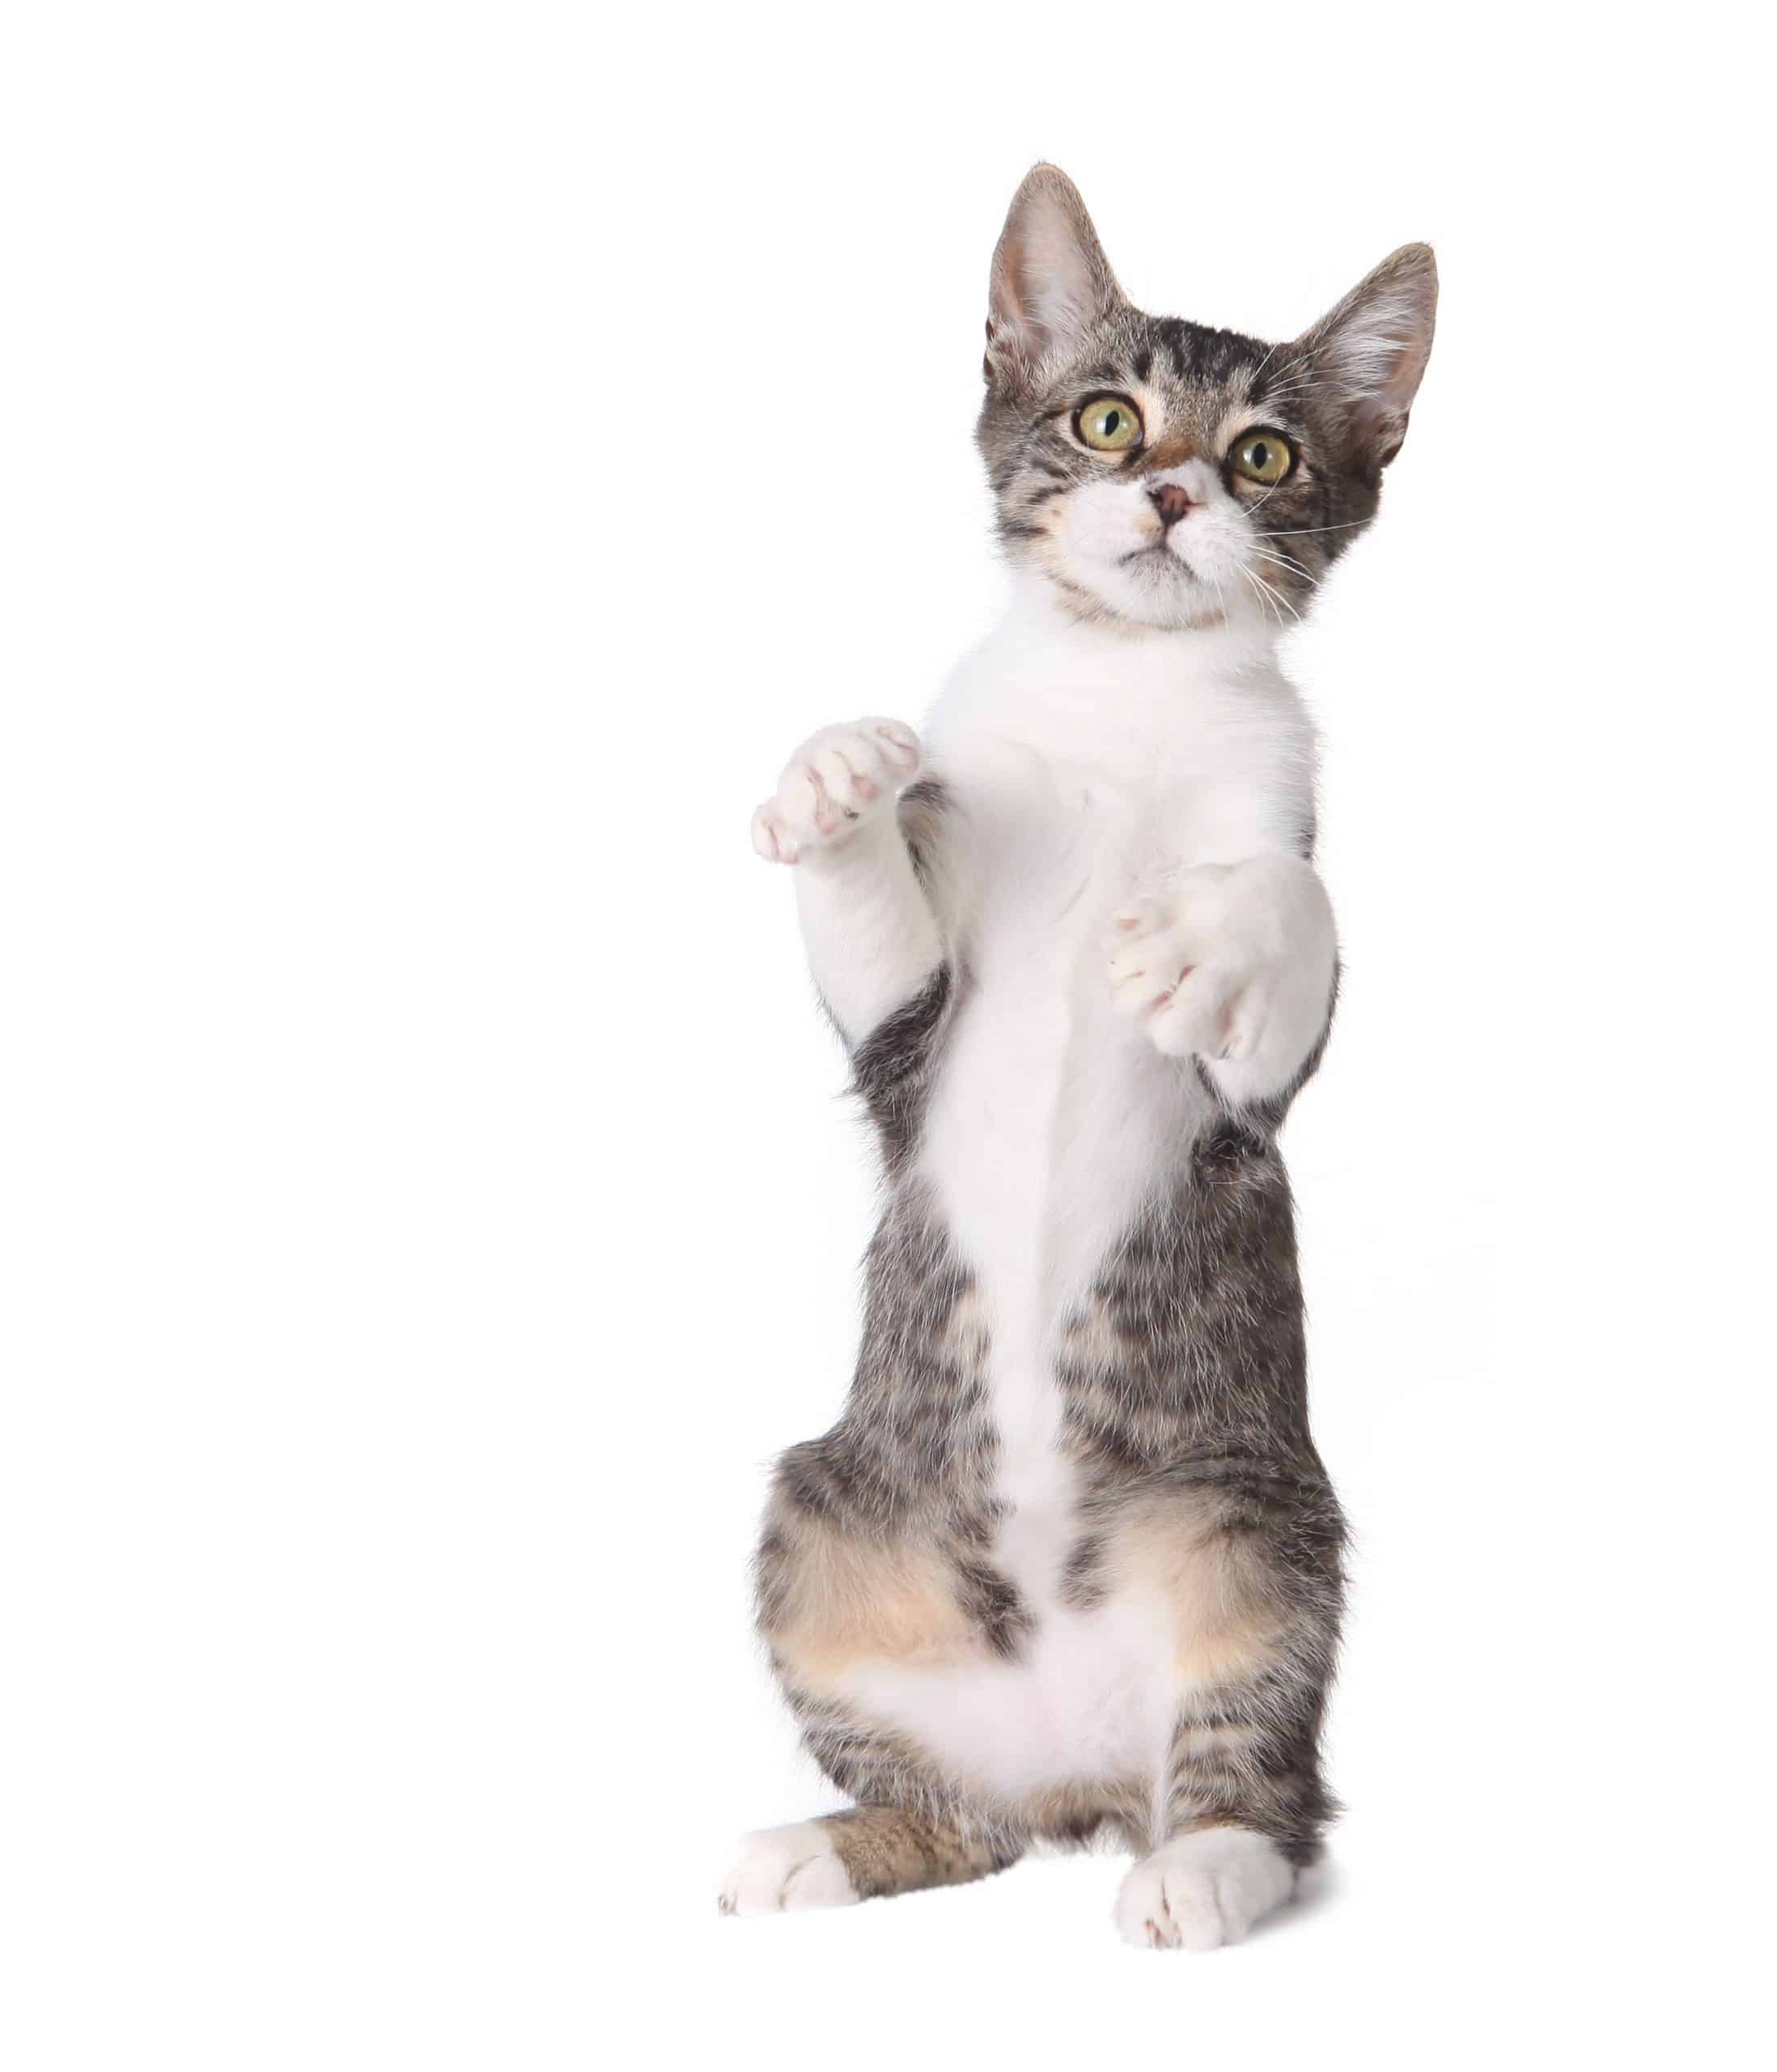 Hind Leg Weakness In Cats